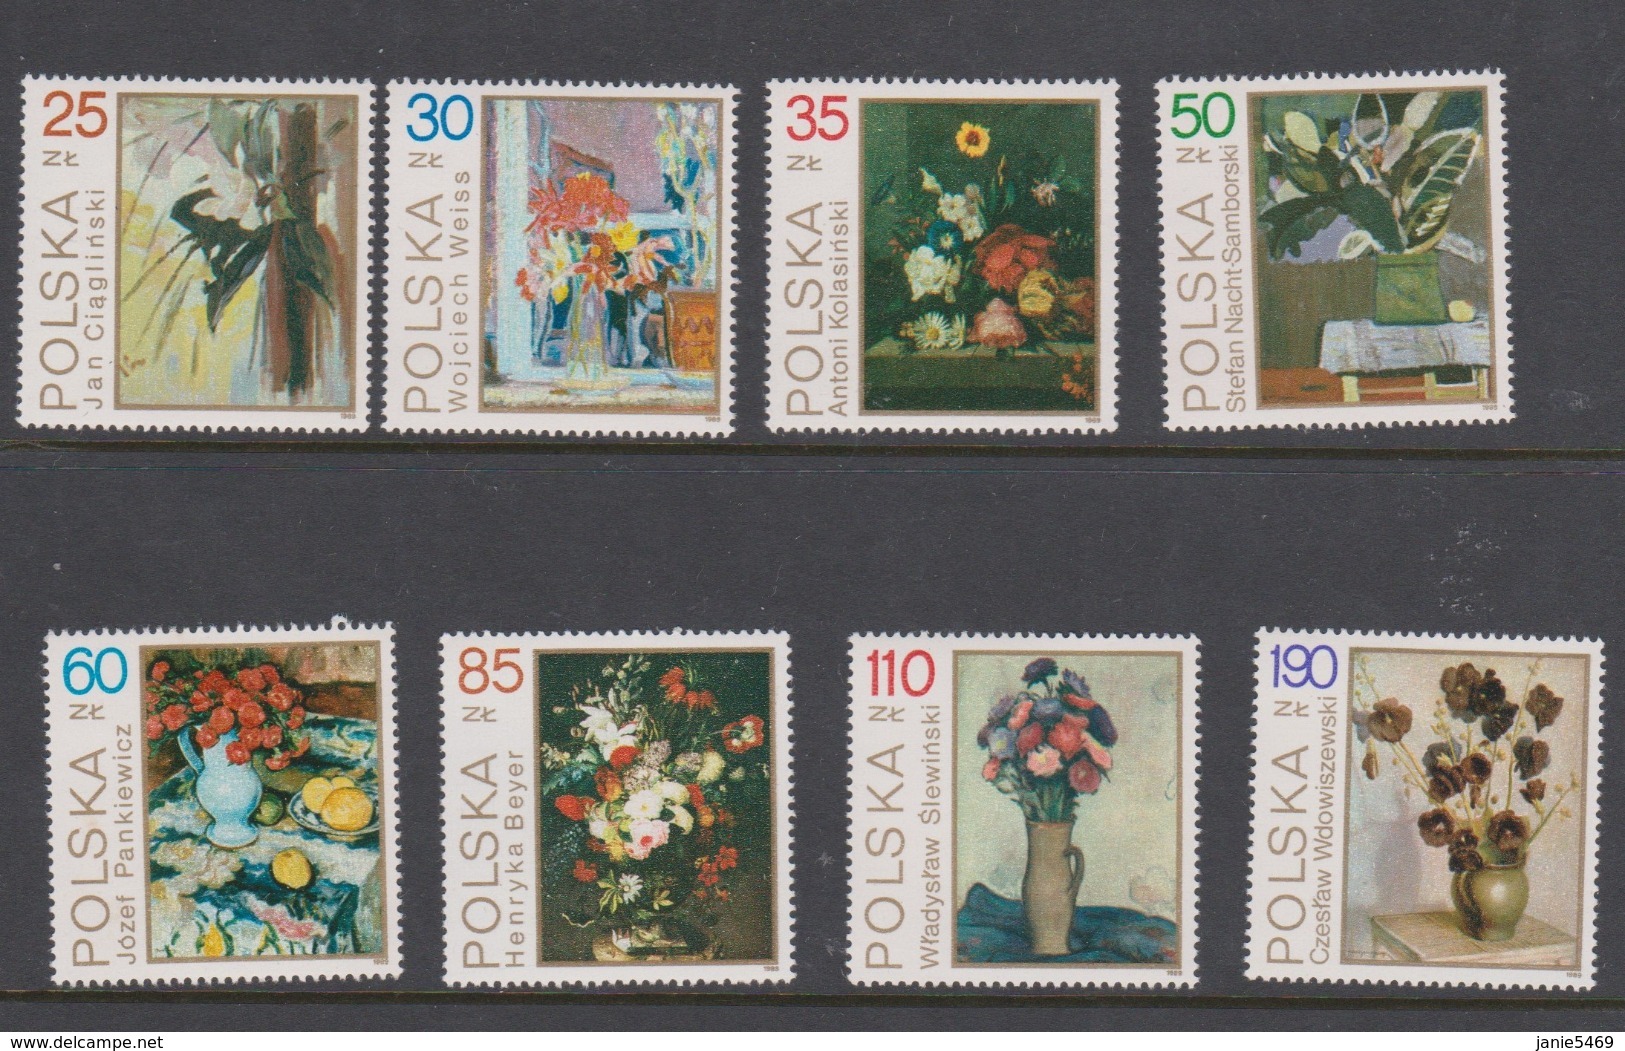 Poland Scott 2940-2947 1989 Paintings Flowers,mint Never Hinged Set - Used Stamps